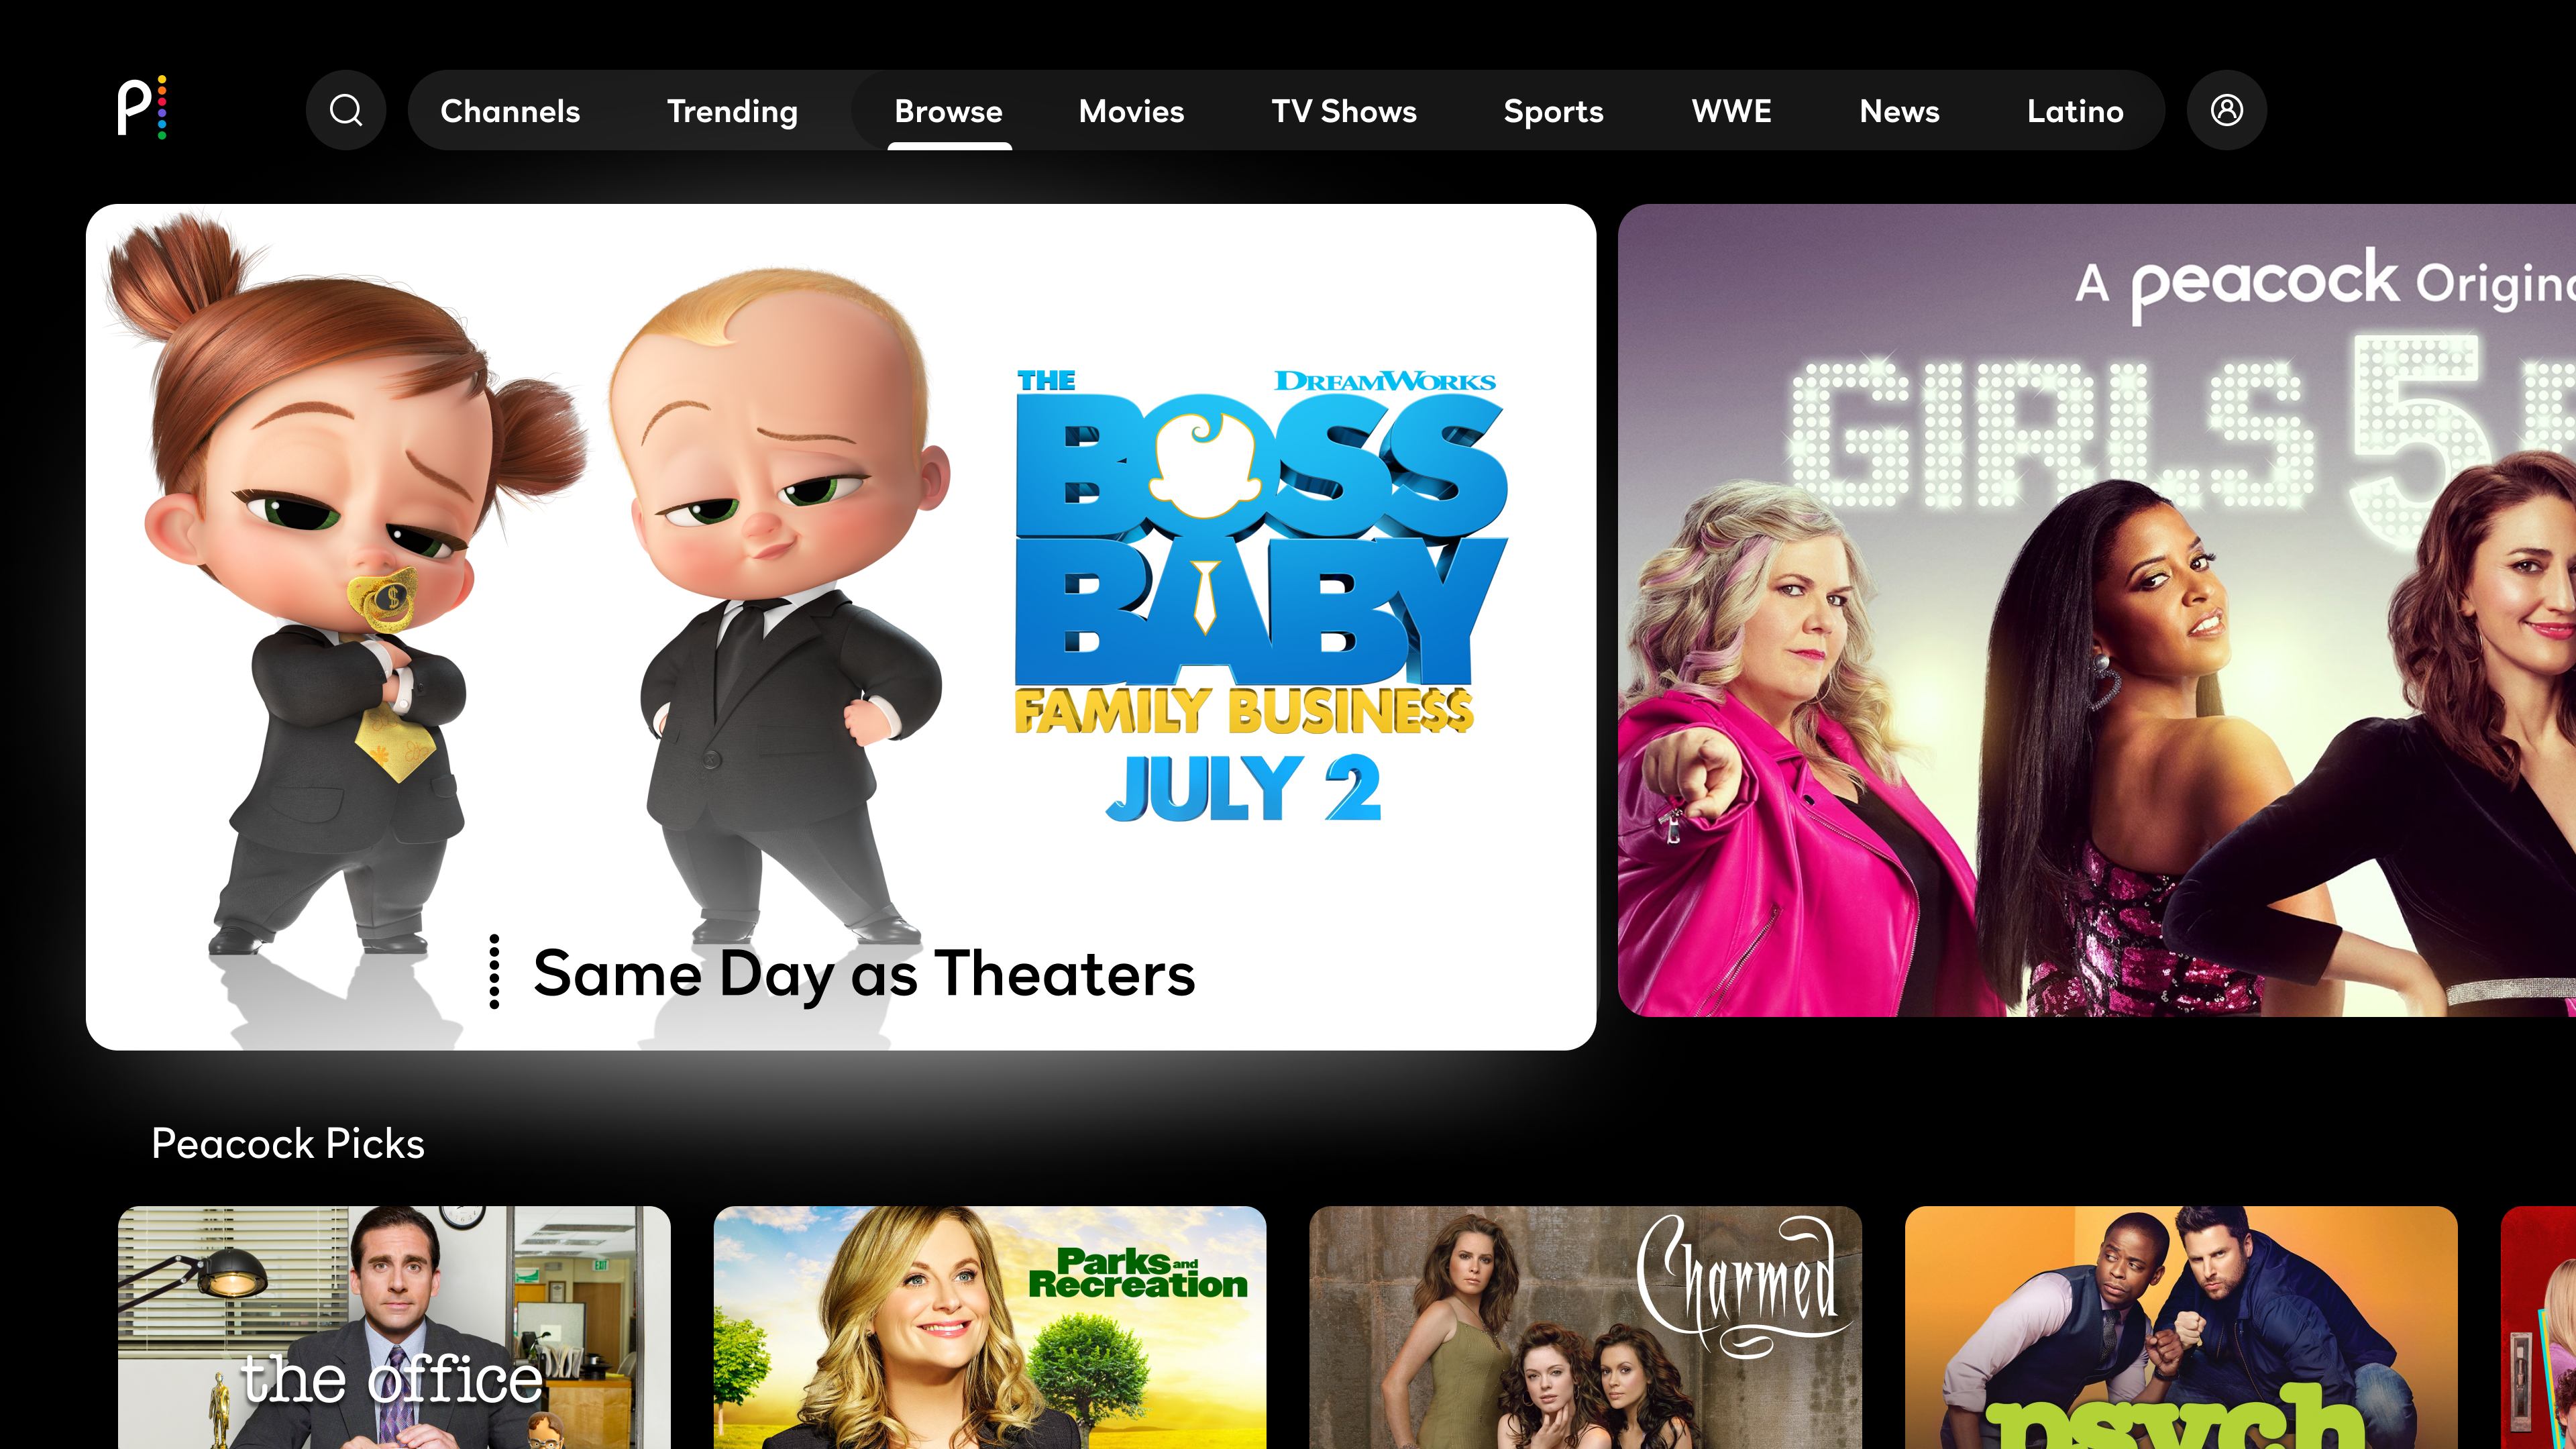 DreamWorks’ ‘The Boss Baby: Family Business’ Will Premiere on Peacock The Same Day as Theaters